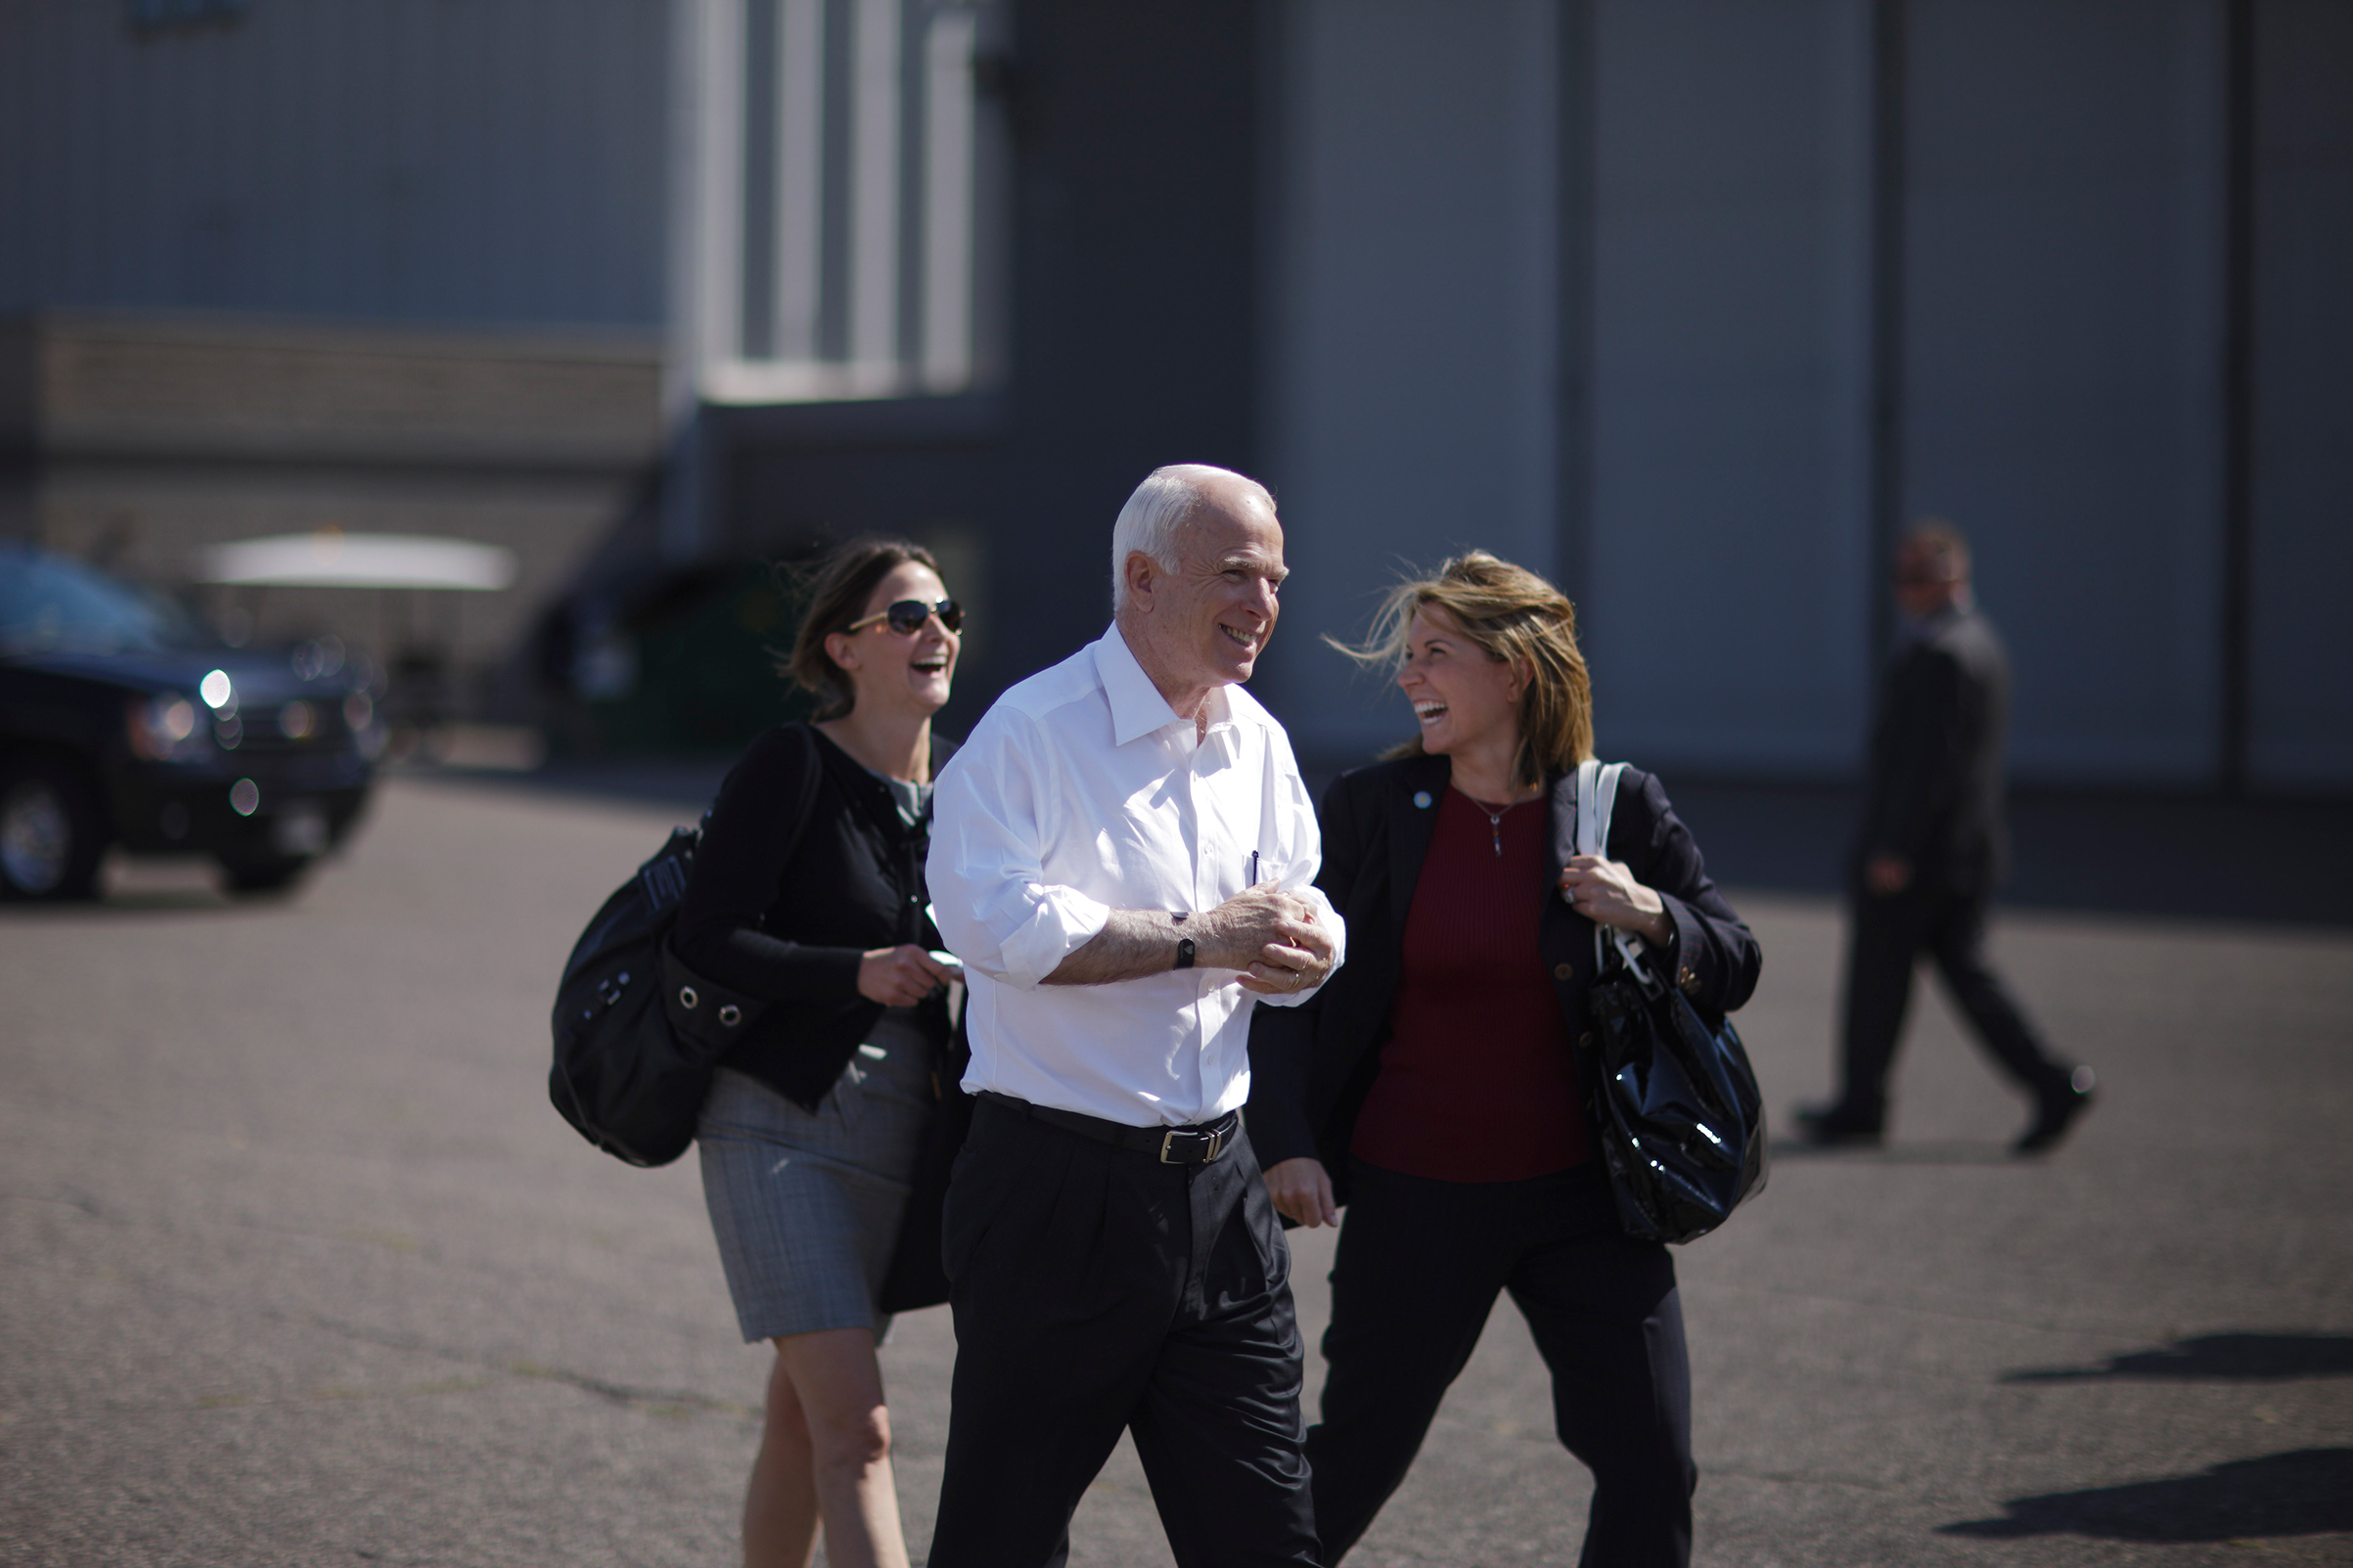 John McCain with staffers at the Key Air Hangar at the Anoka County Blaine Airport in Blaine, Minnesota on September 19, 2008. (Christopher Morris—VII for TIME Sen.)